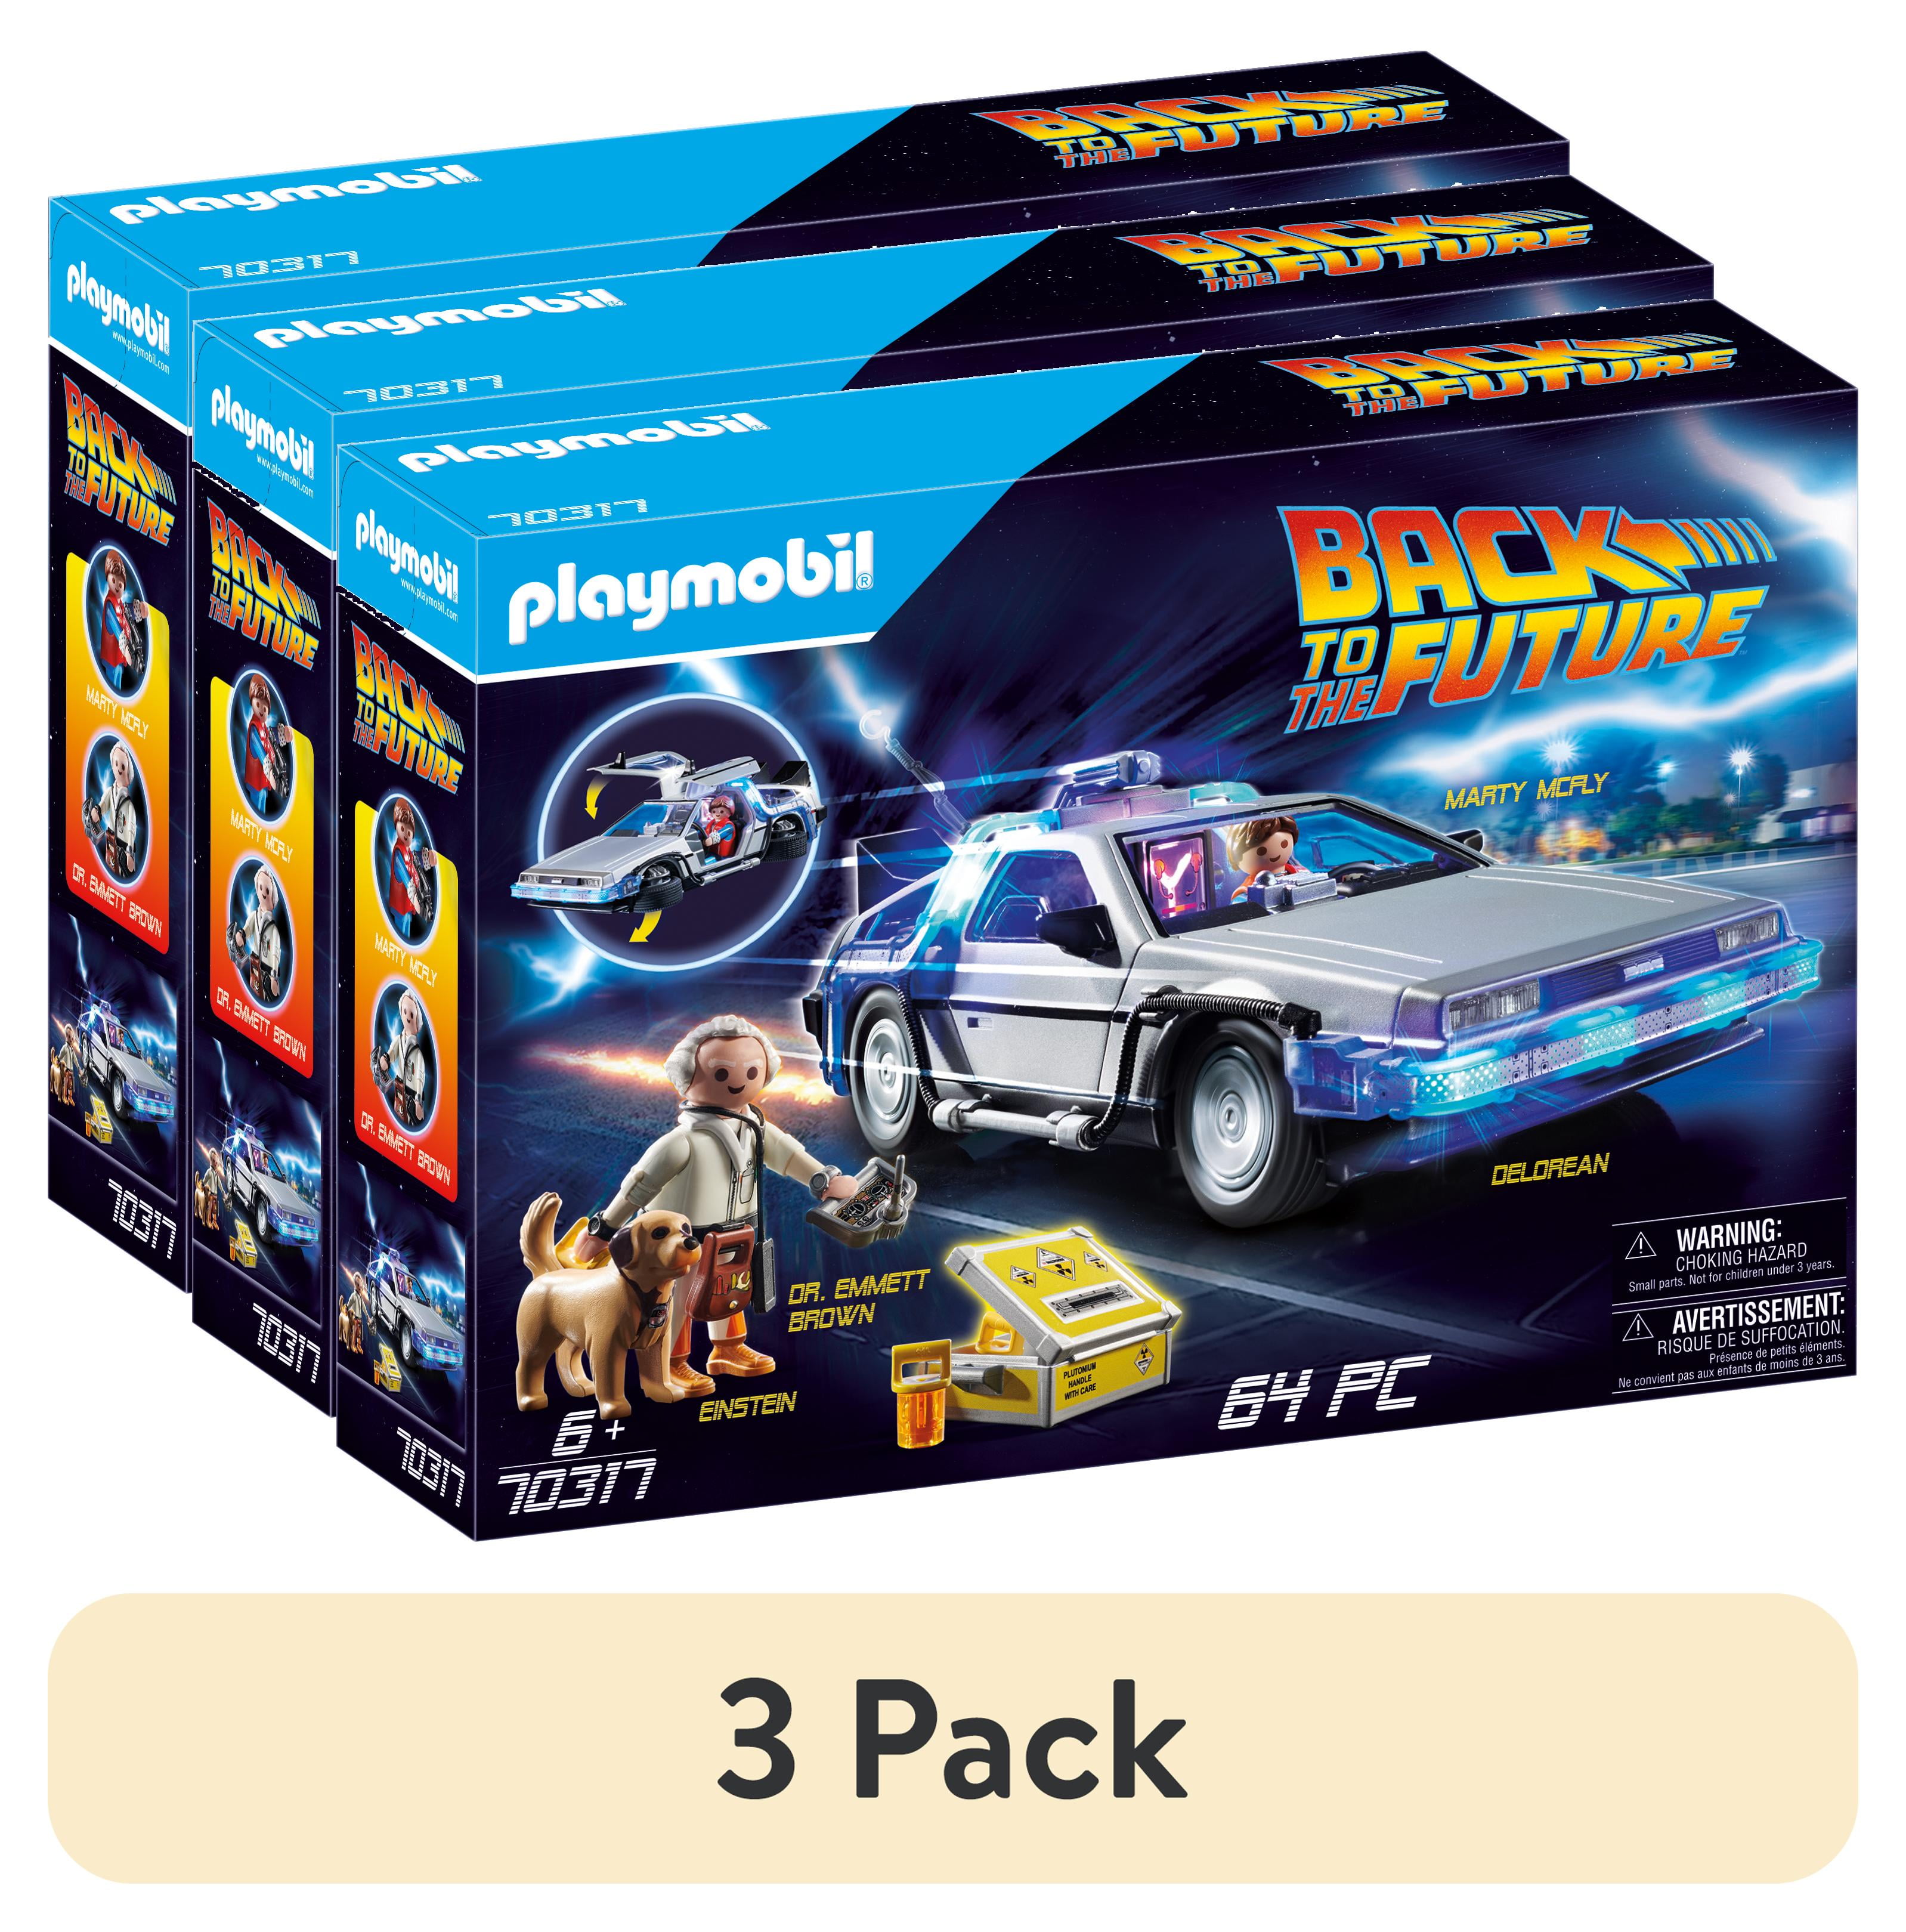 3 pack) PLAYMOBIL Back to the Future DeLorean 